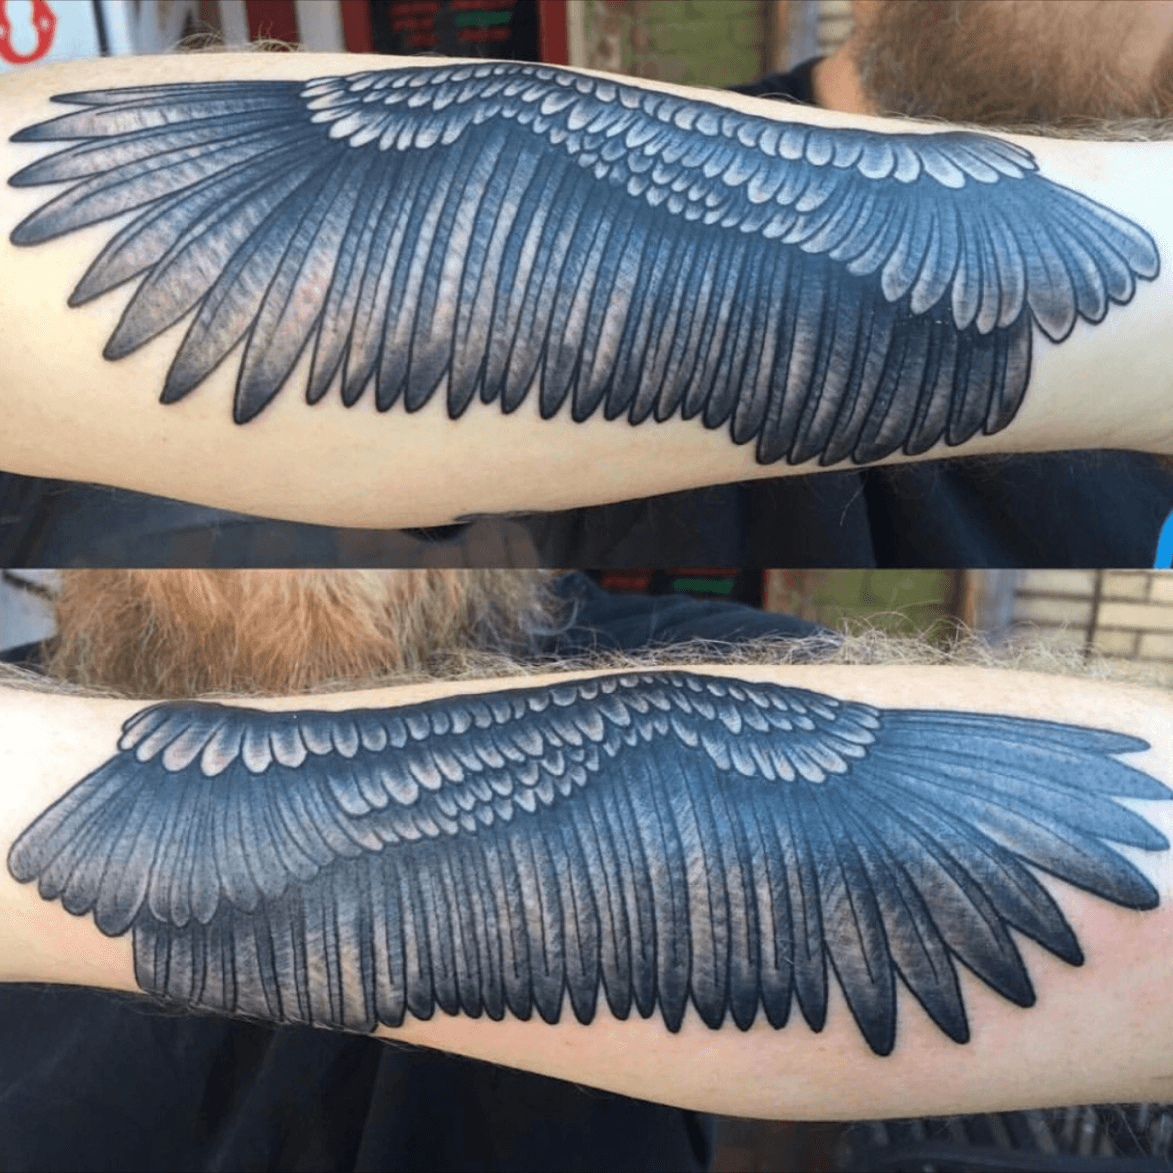 Andean Condor  done by Marcelo at Immortal Gallery Bogotá Colombia  r tattoo